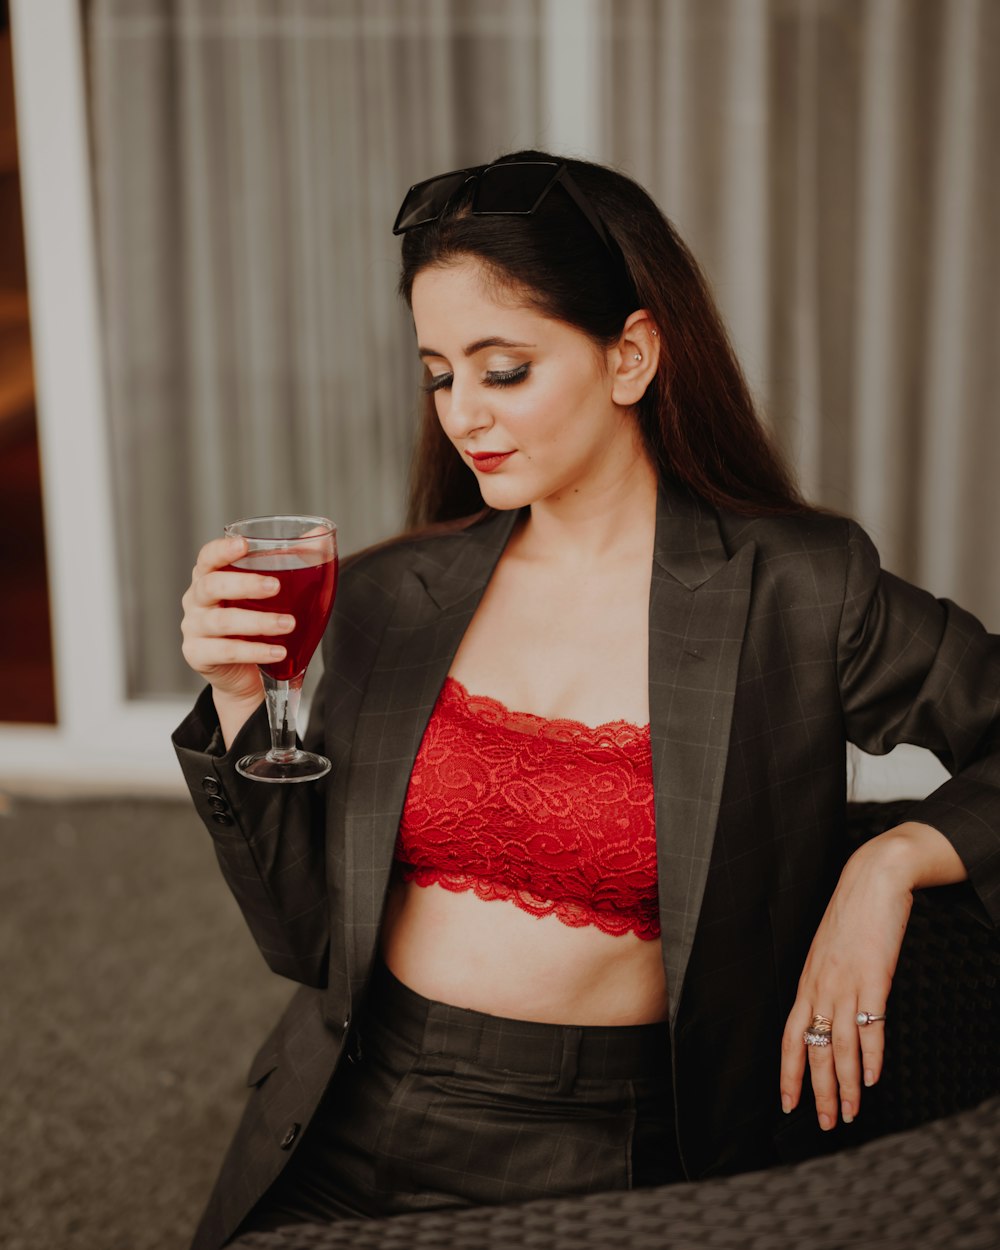 woman in red lace brassiere and black blazer holding clear drinking glass